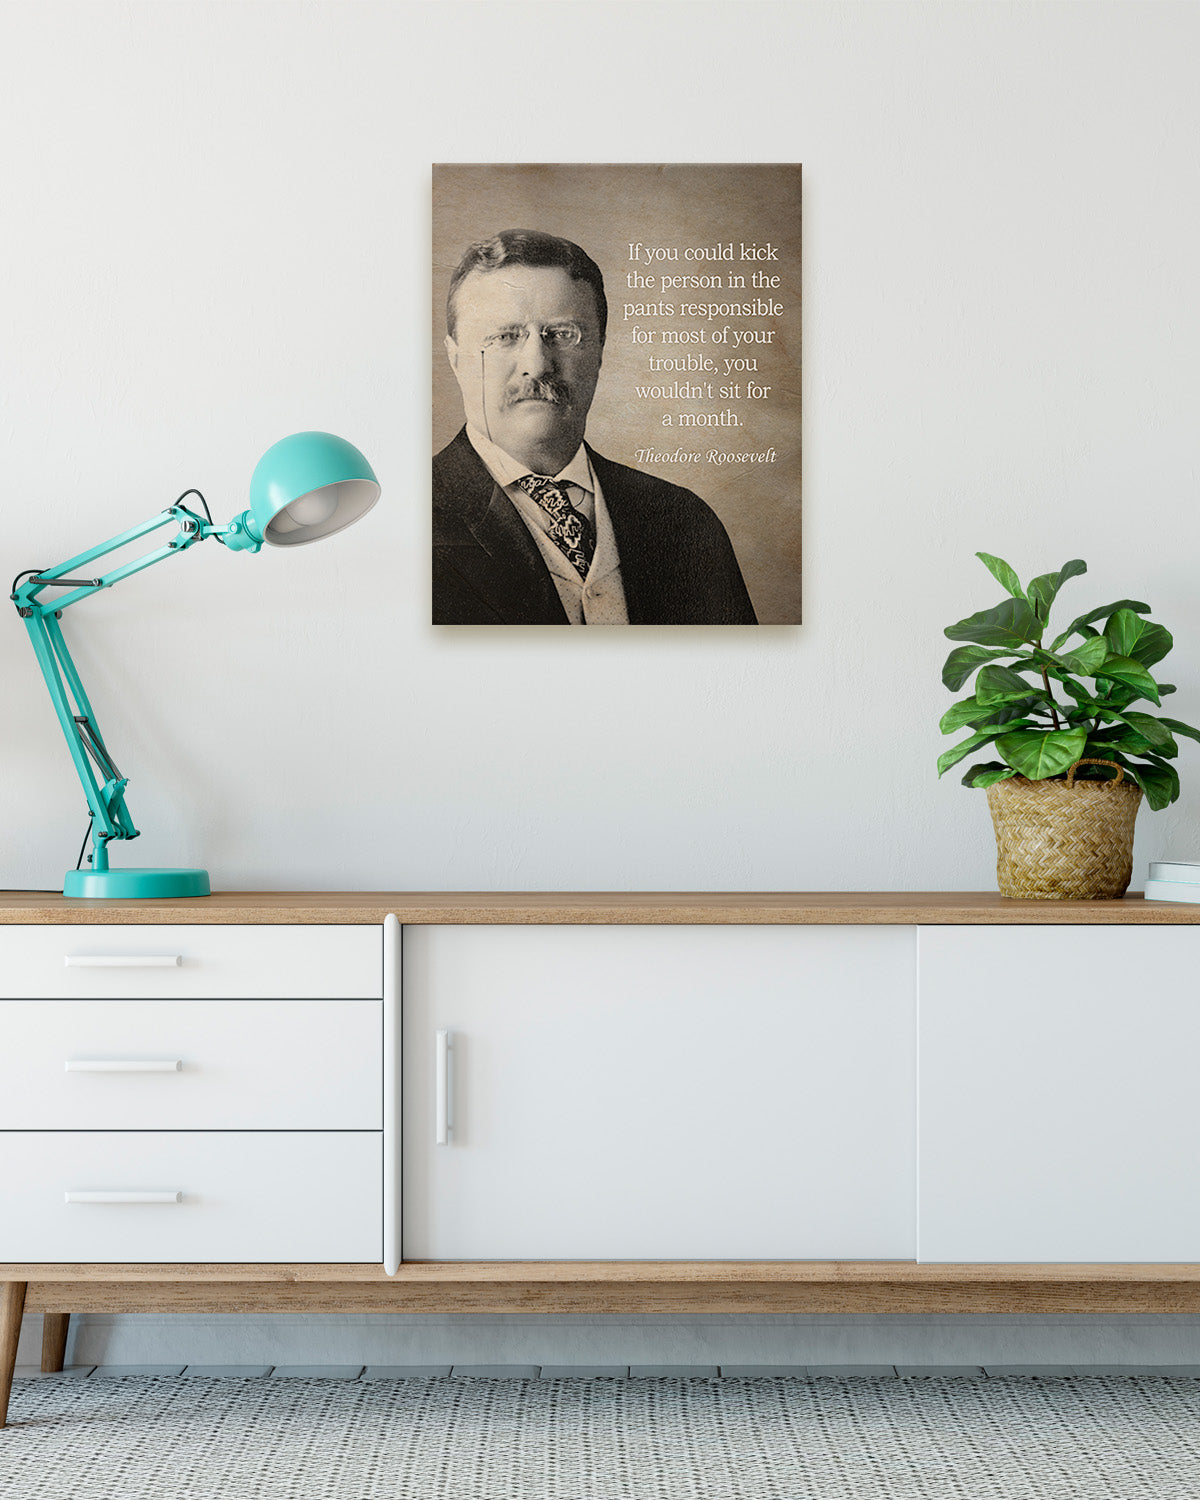 Theodore Roosevelt Historic Quote - If you could kick the person - Great Inspirational Gift - Motivational Print - American Patriotic President